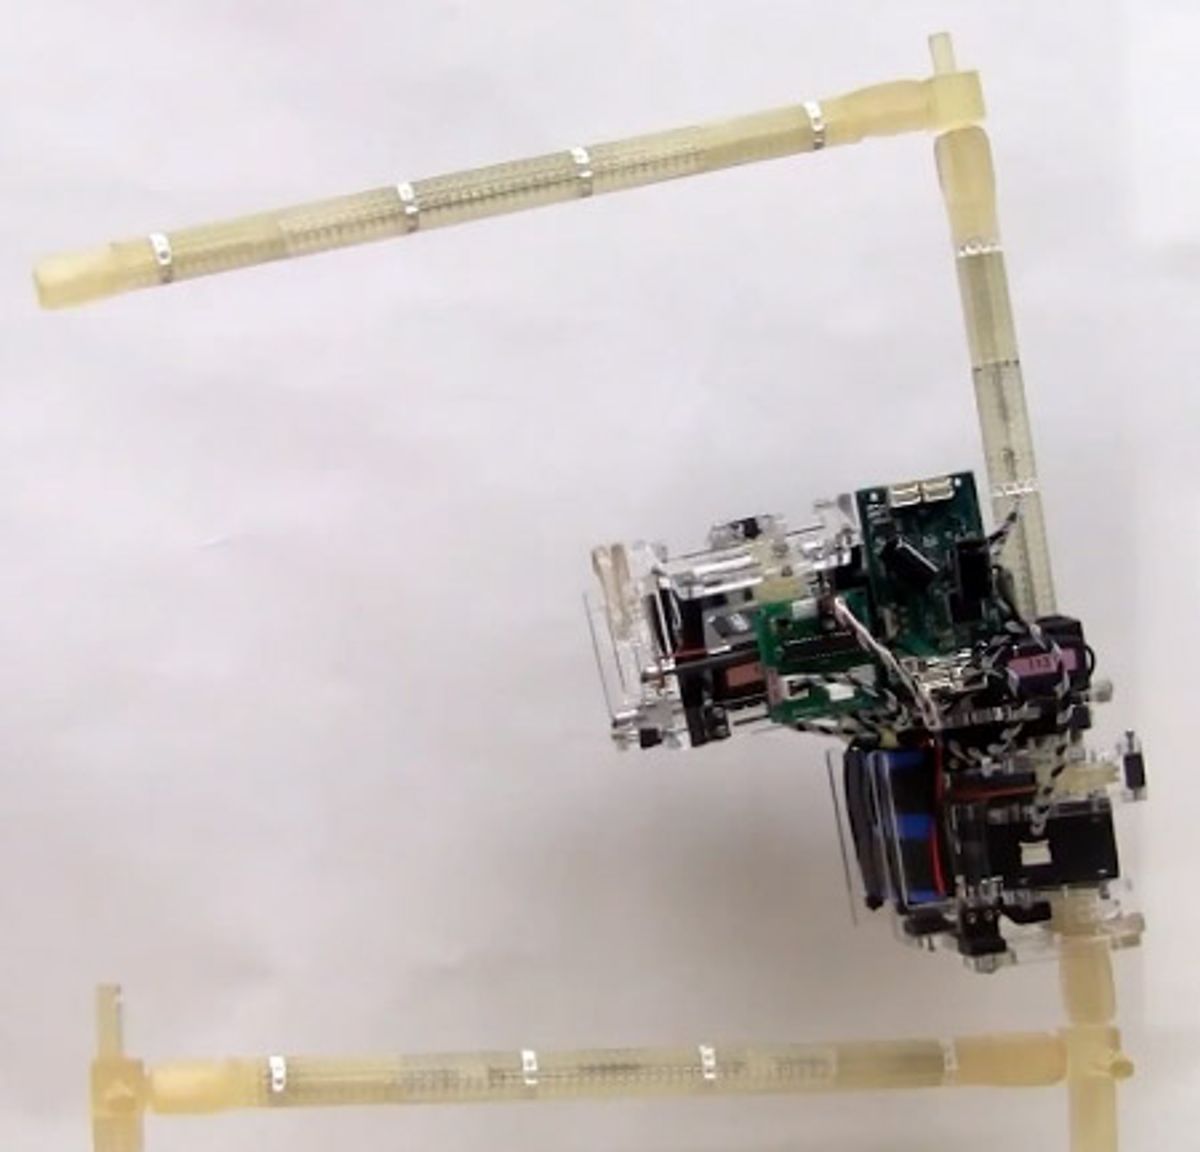 Truss-Climbing Robot Can Build Structures, Take Them Apart